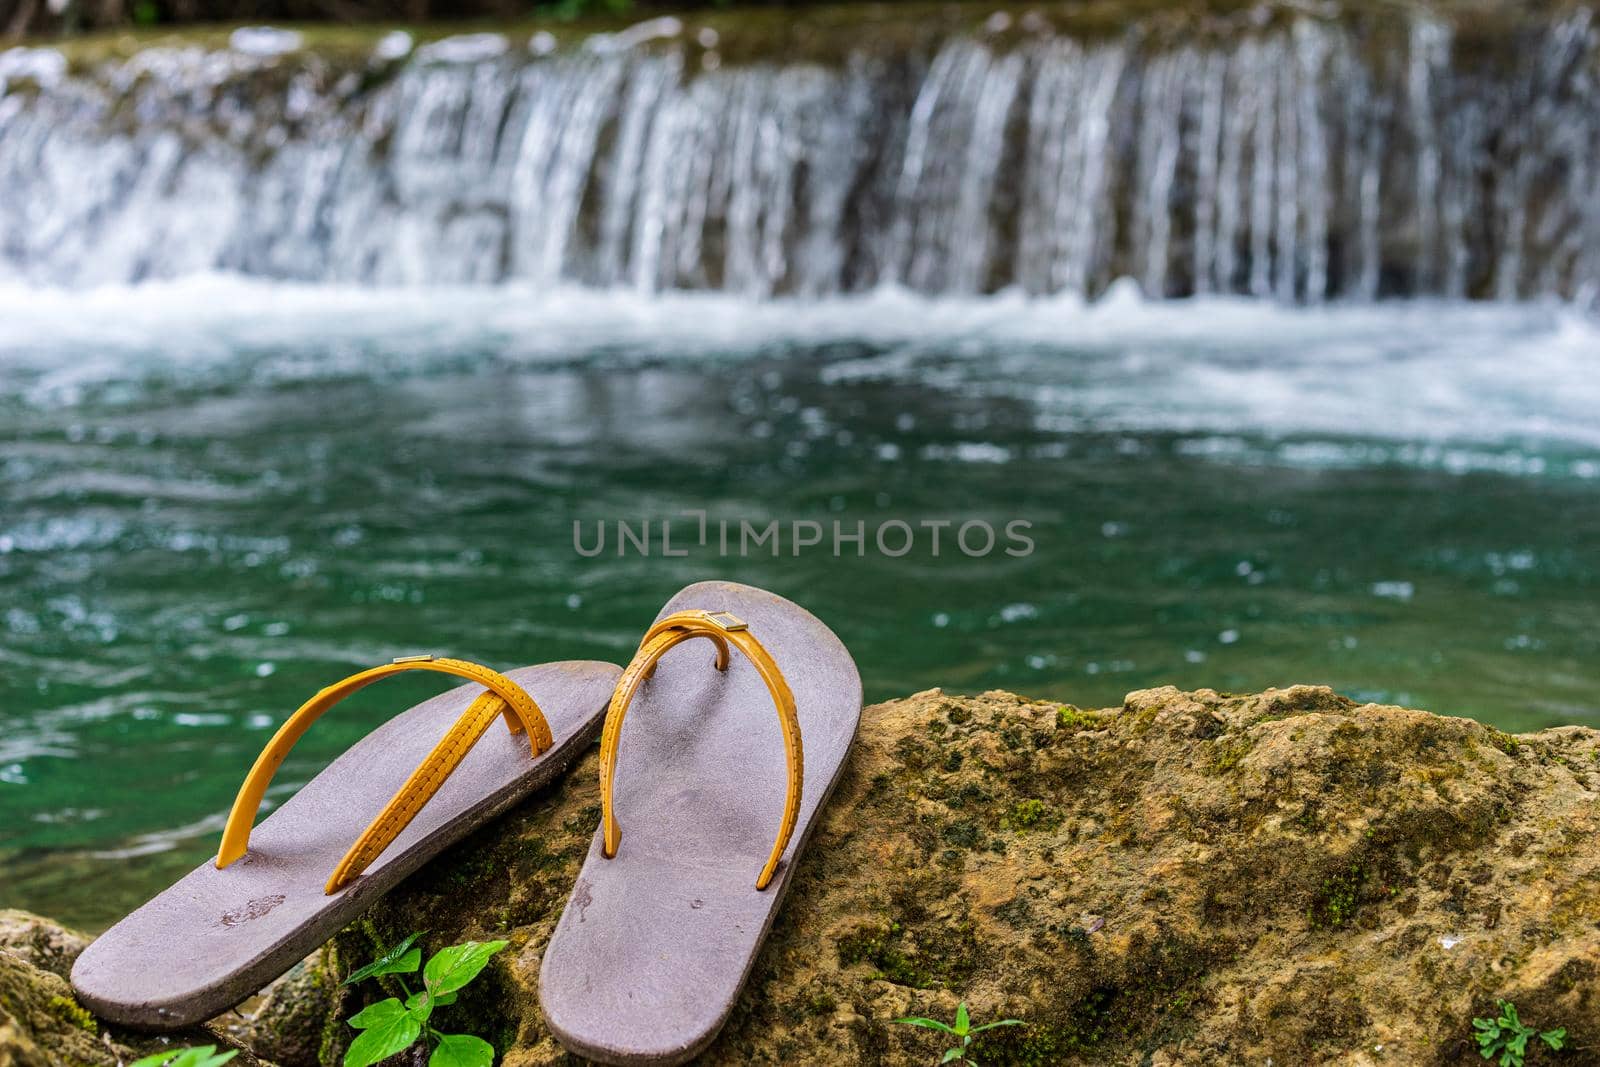 Slippers were placed on the rock in the waterfall